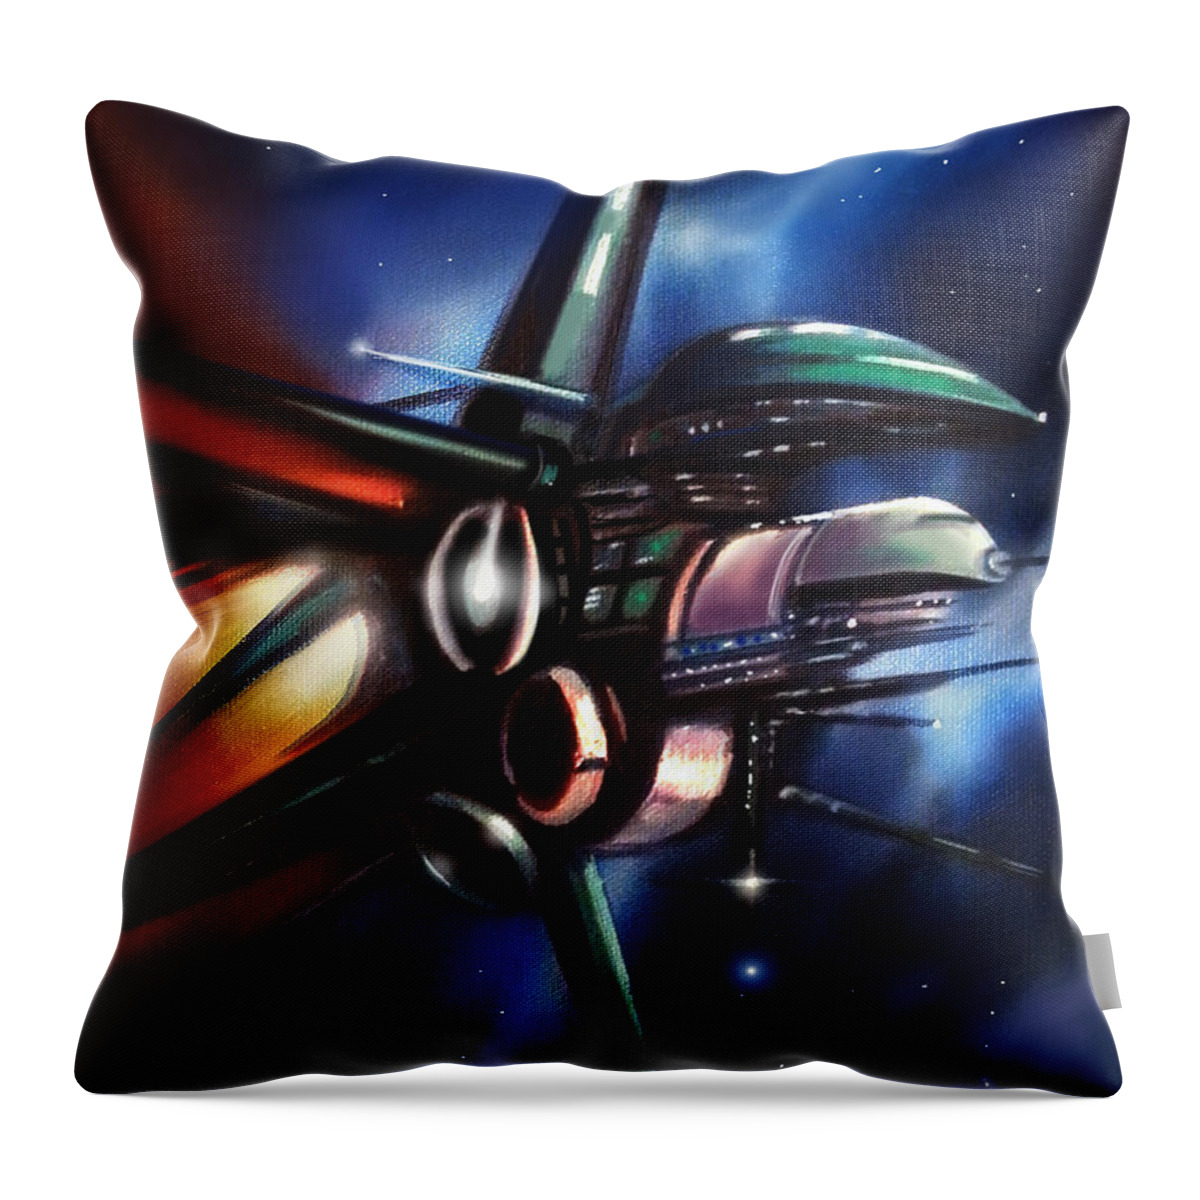 Starships Throw Pillow featuring the painting Daedalus Destroyer by James Hill